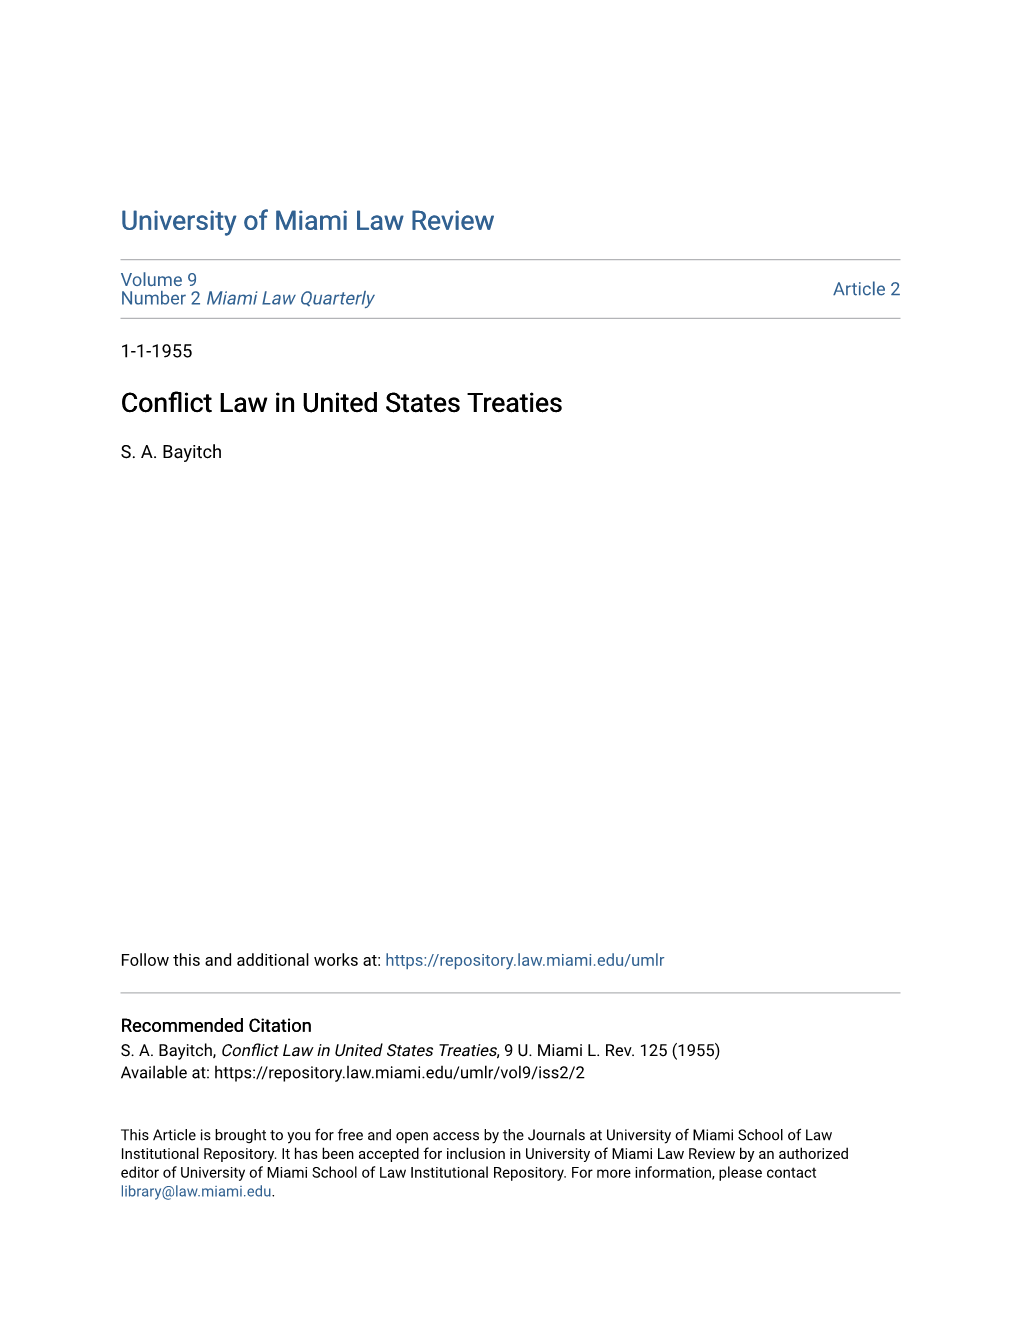 Conflict Law in United States Treaties* S